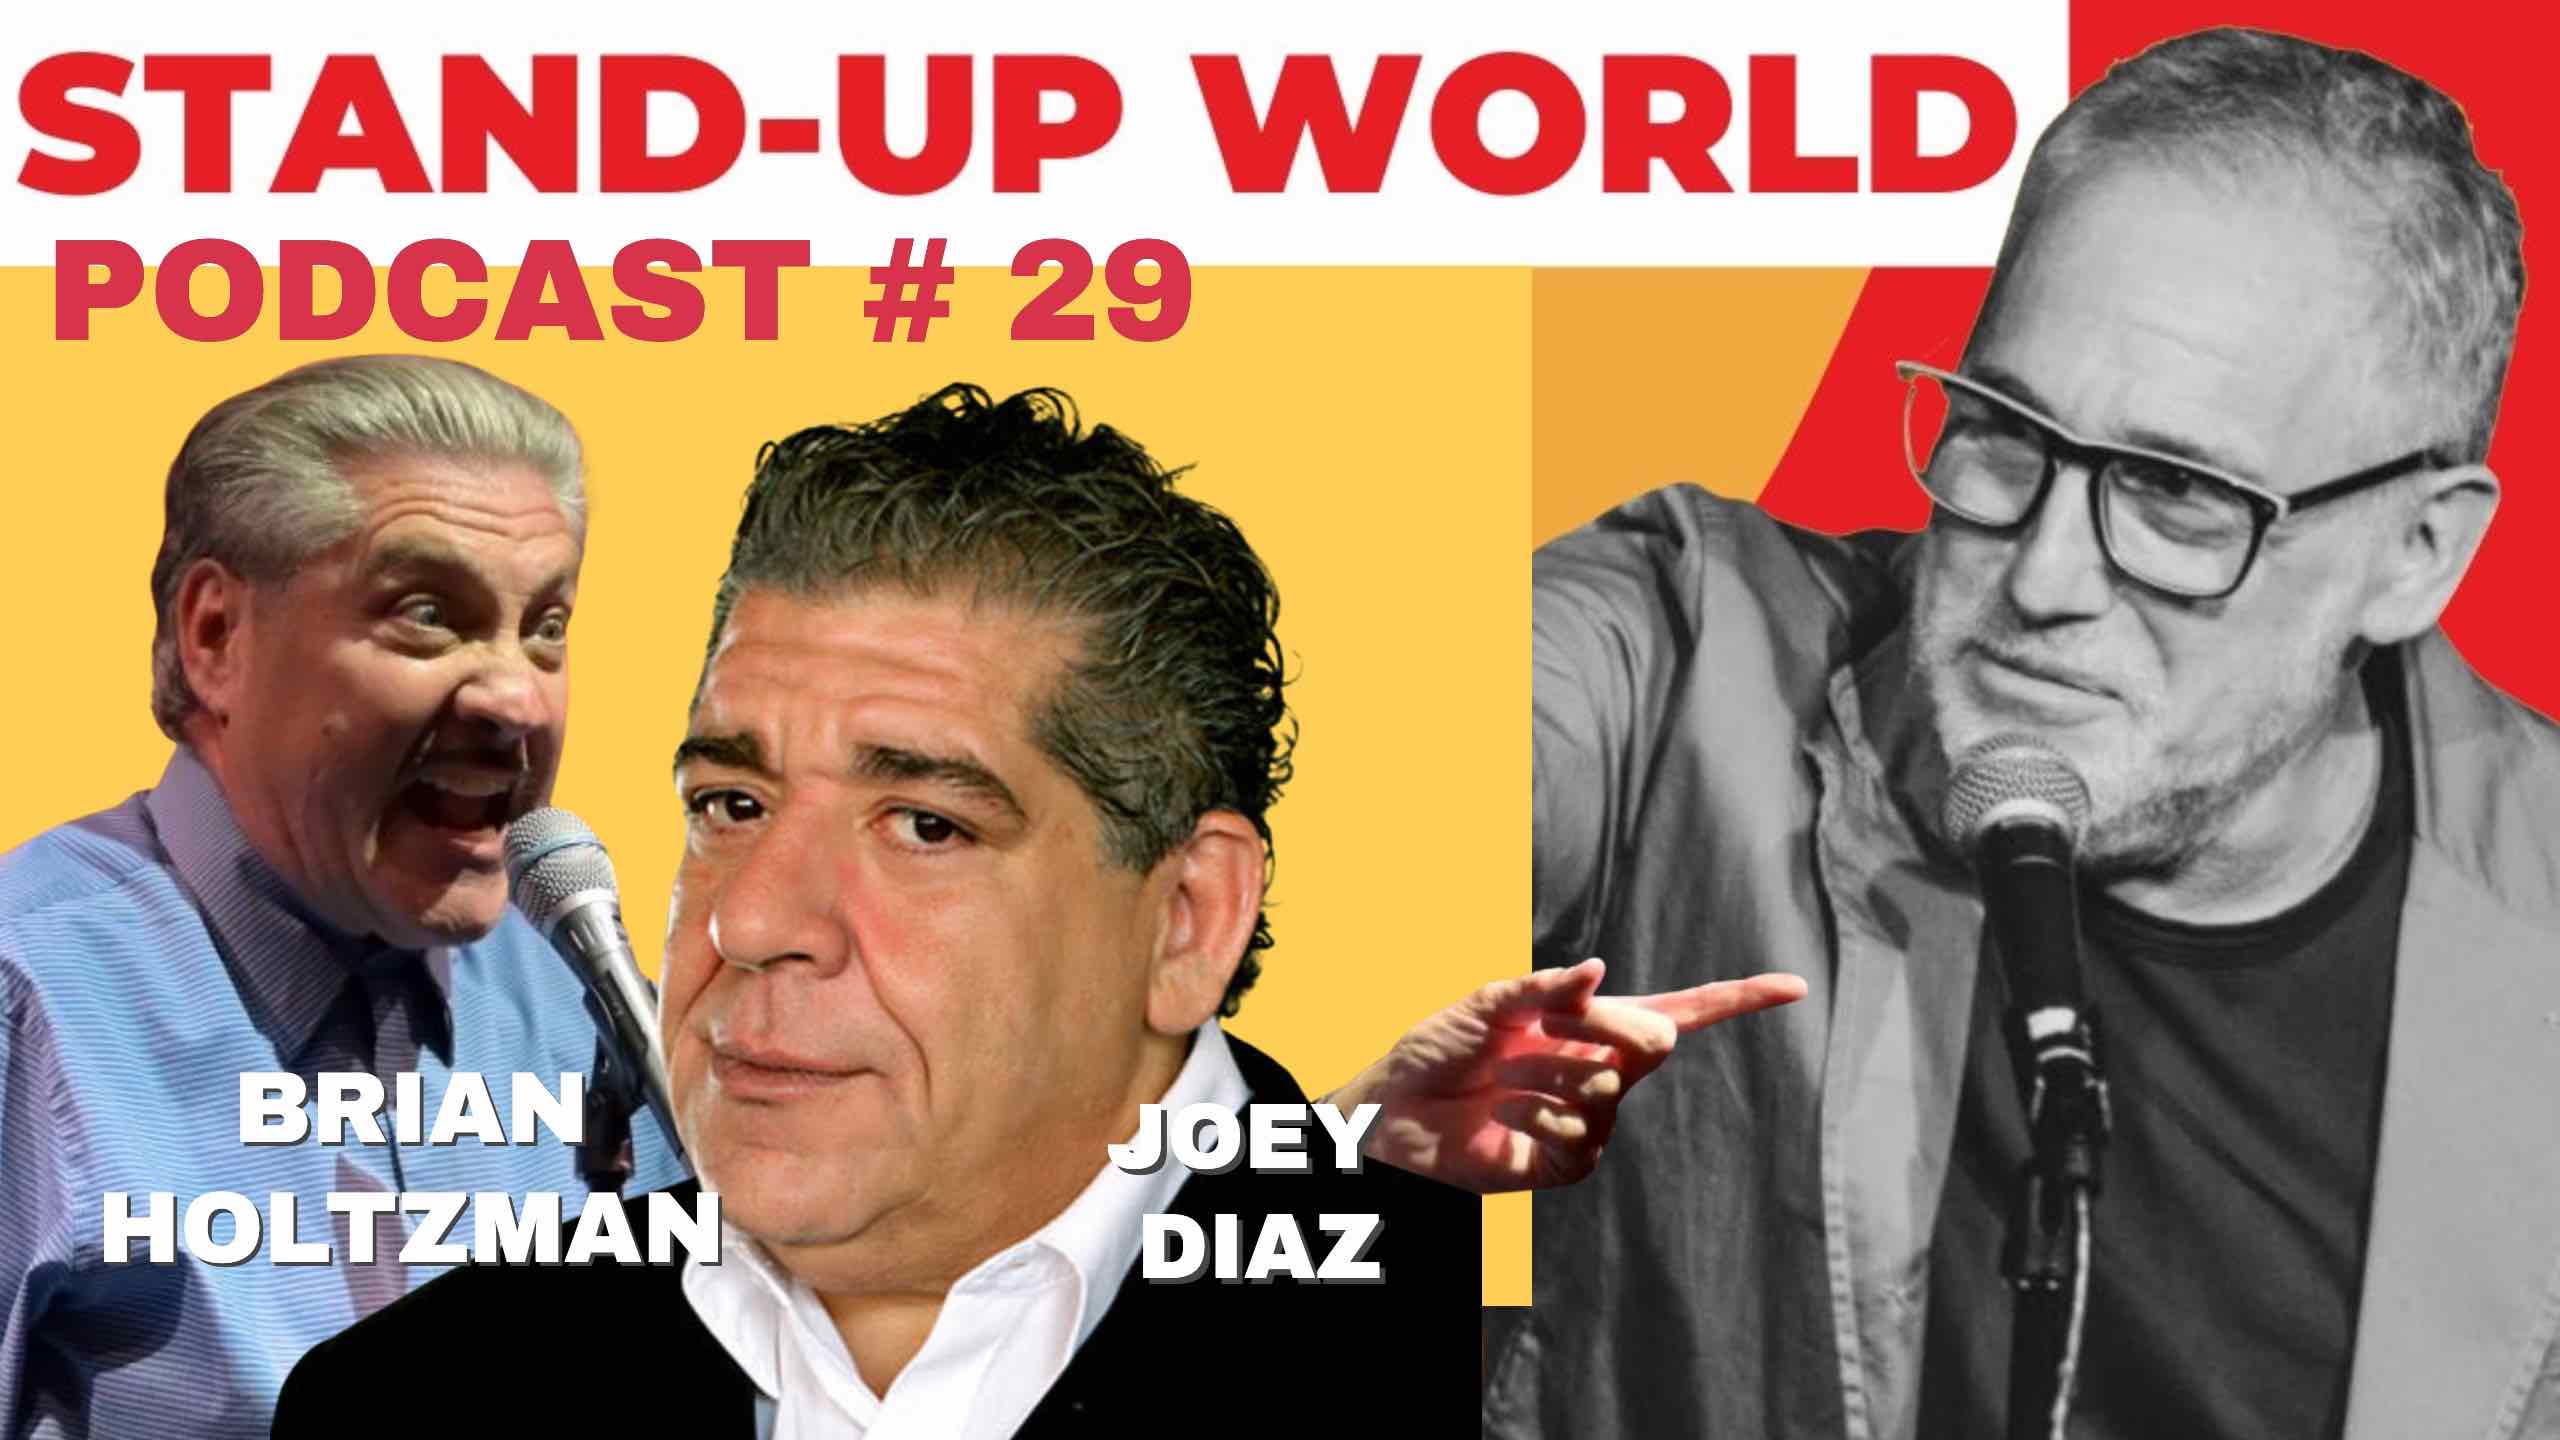 Featured image for “STANDUPWORLD PODCAST Ep#29”